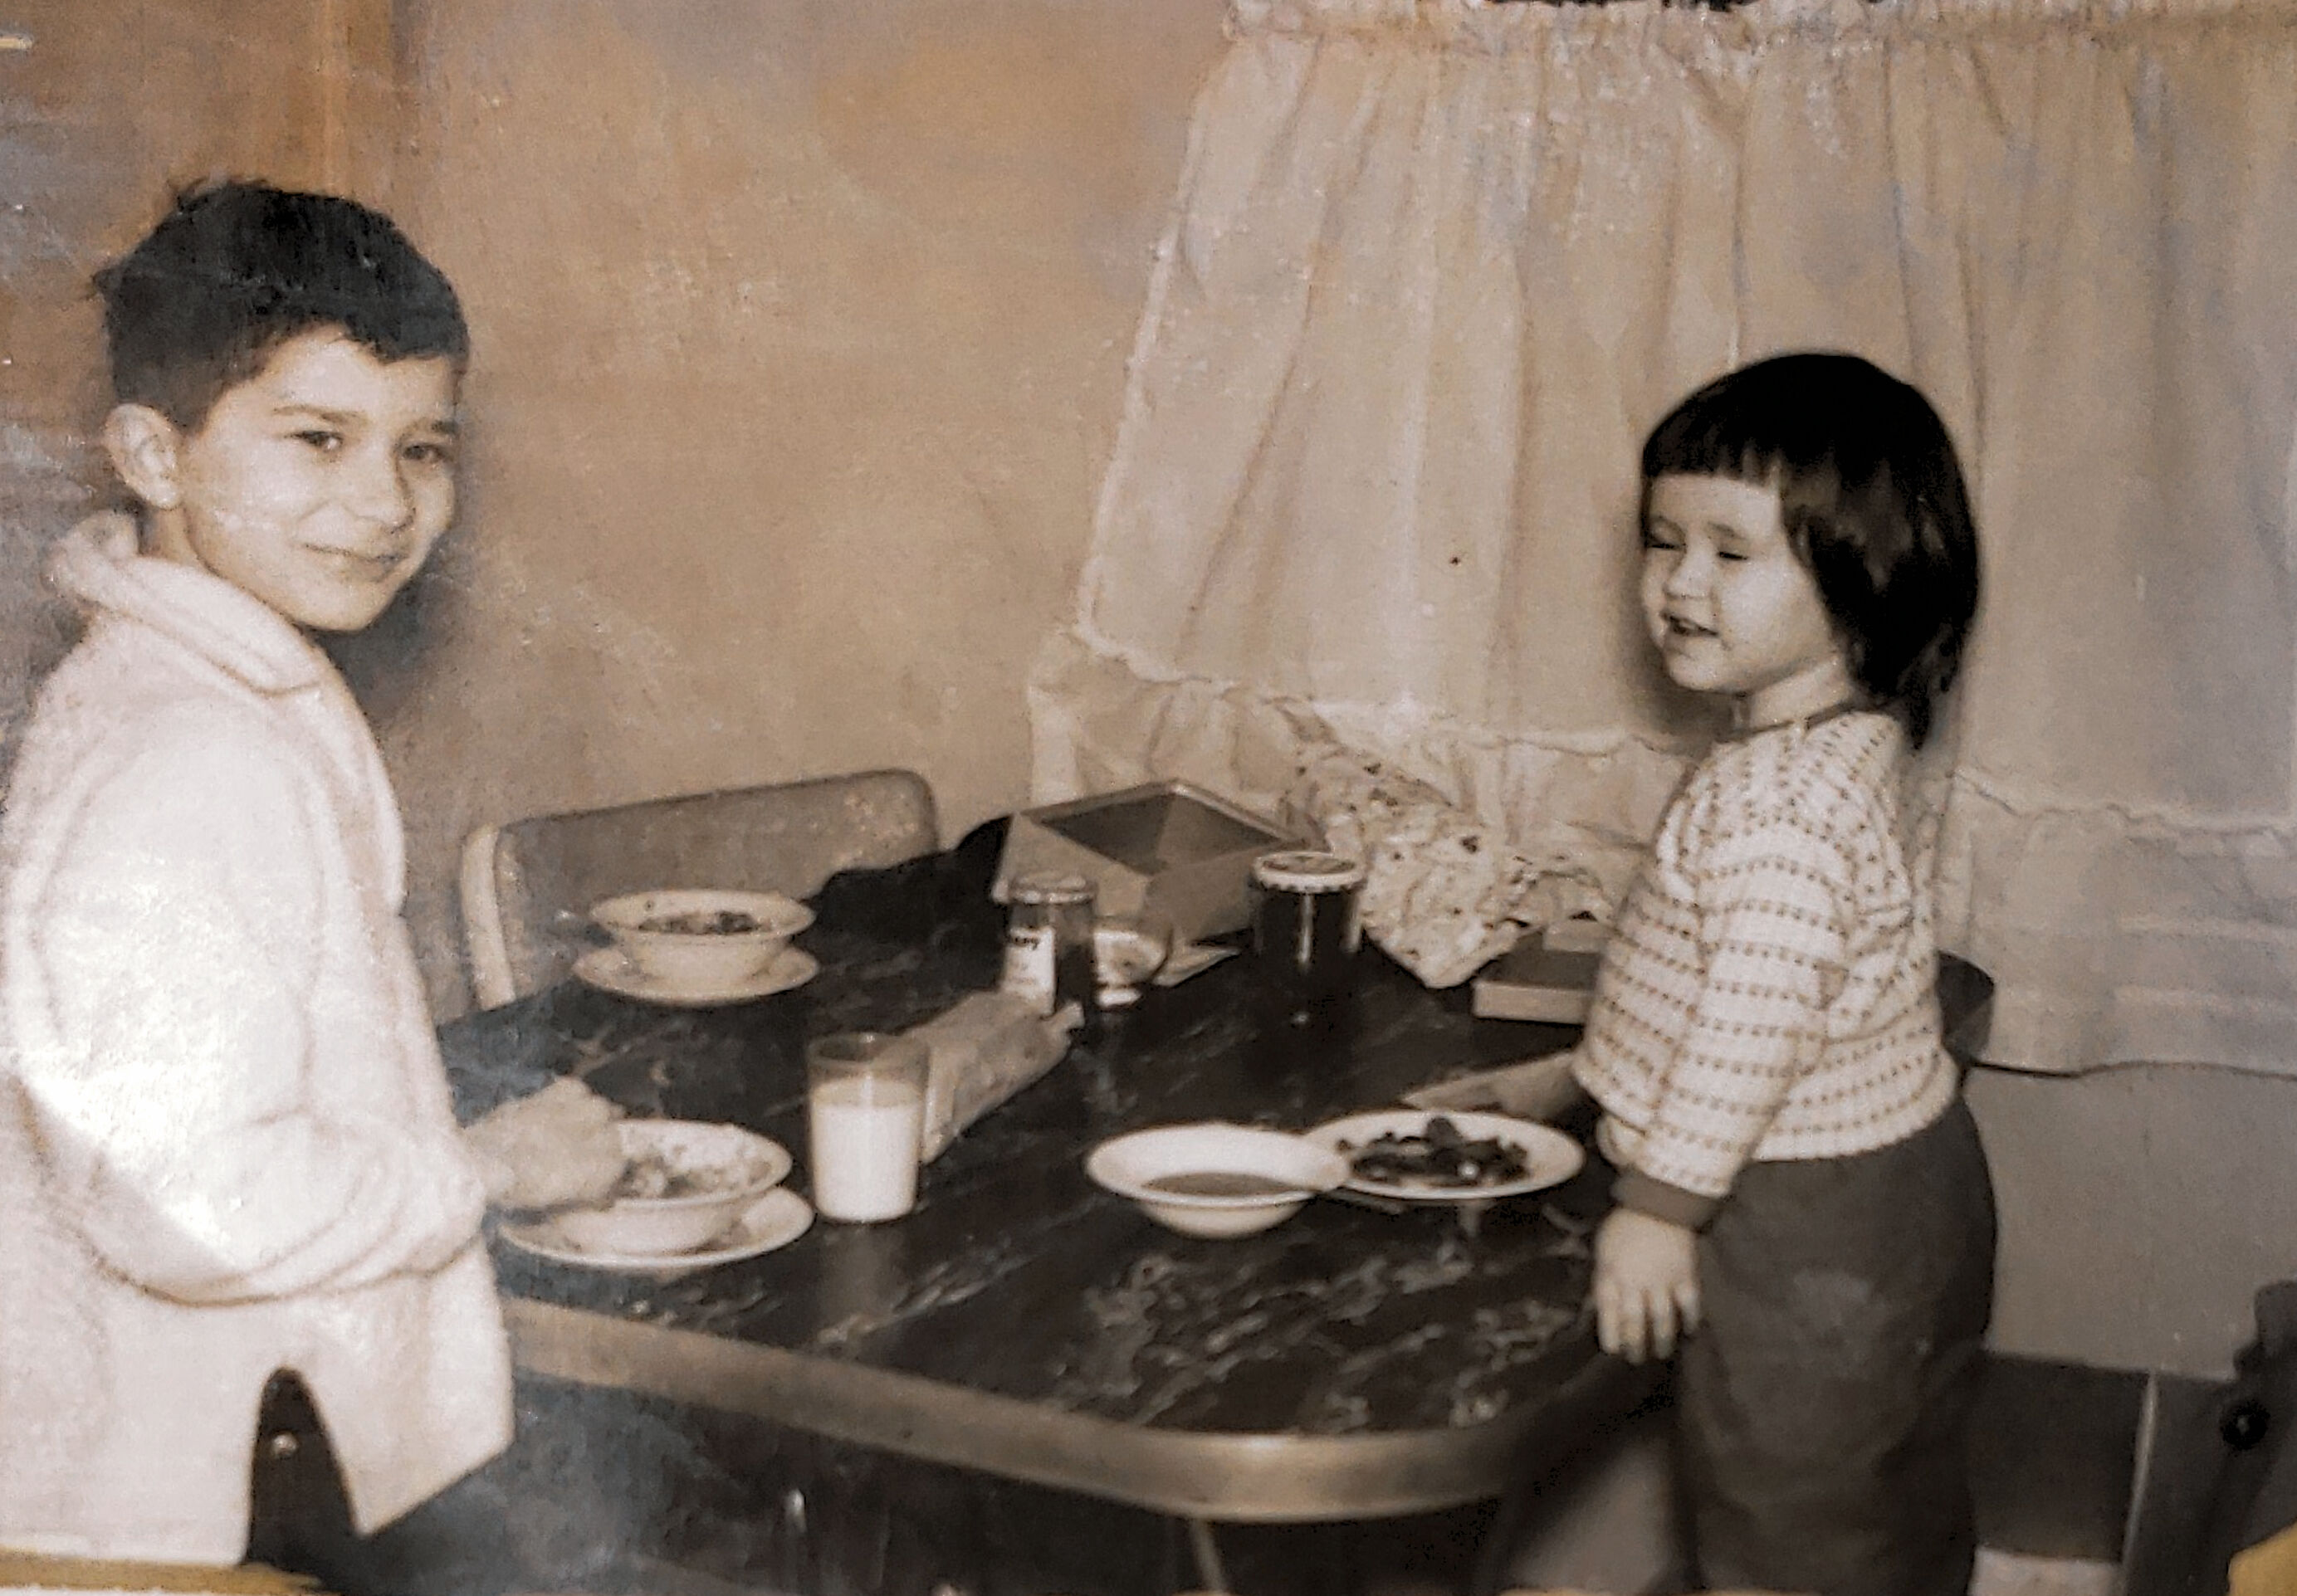 Cindy and Cousin 1965